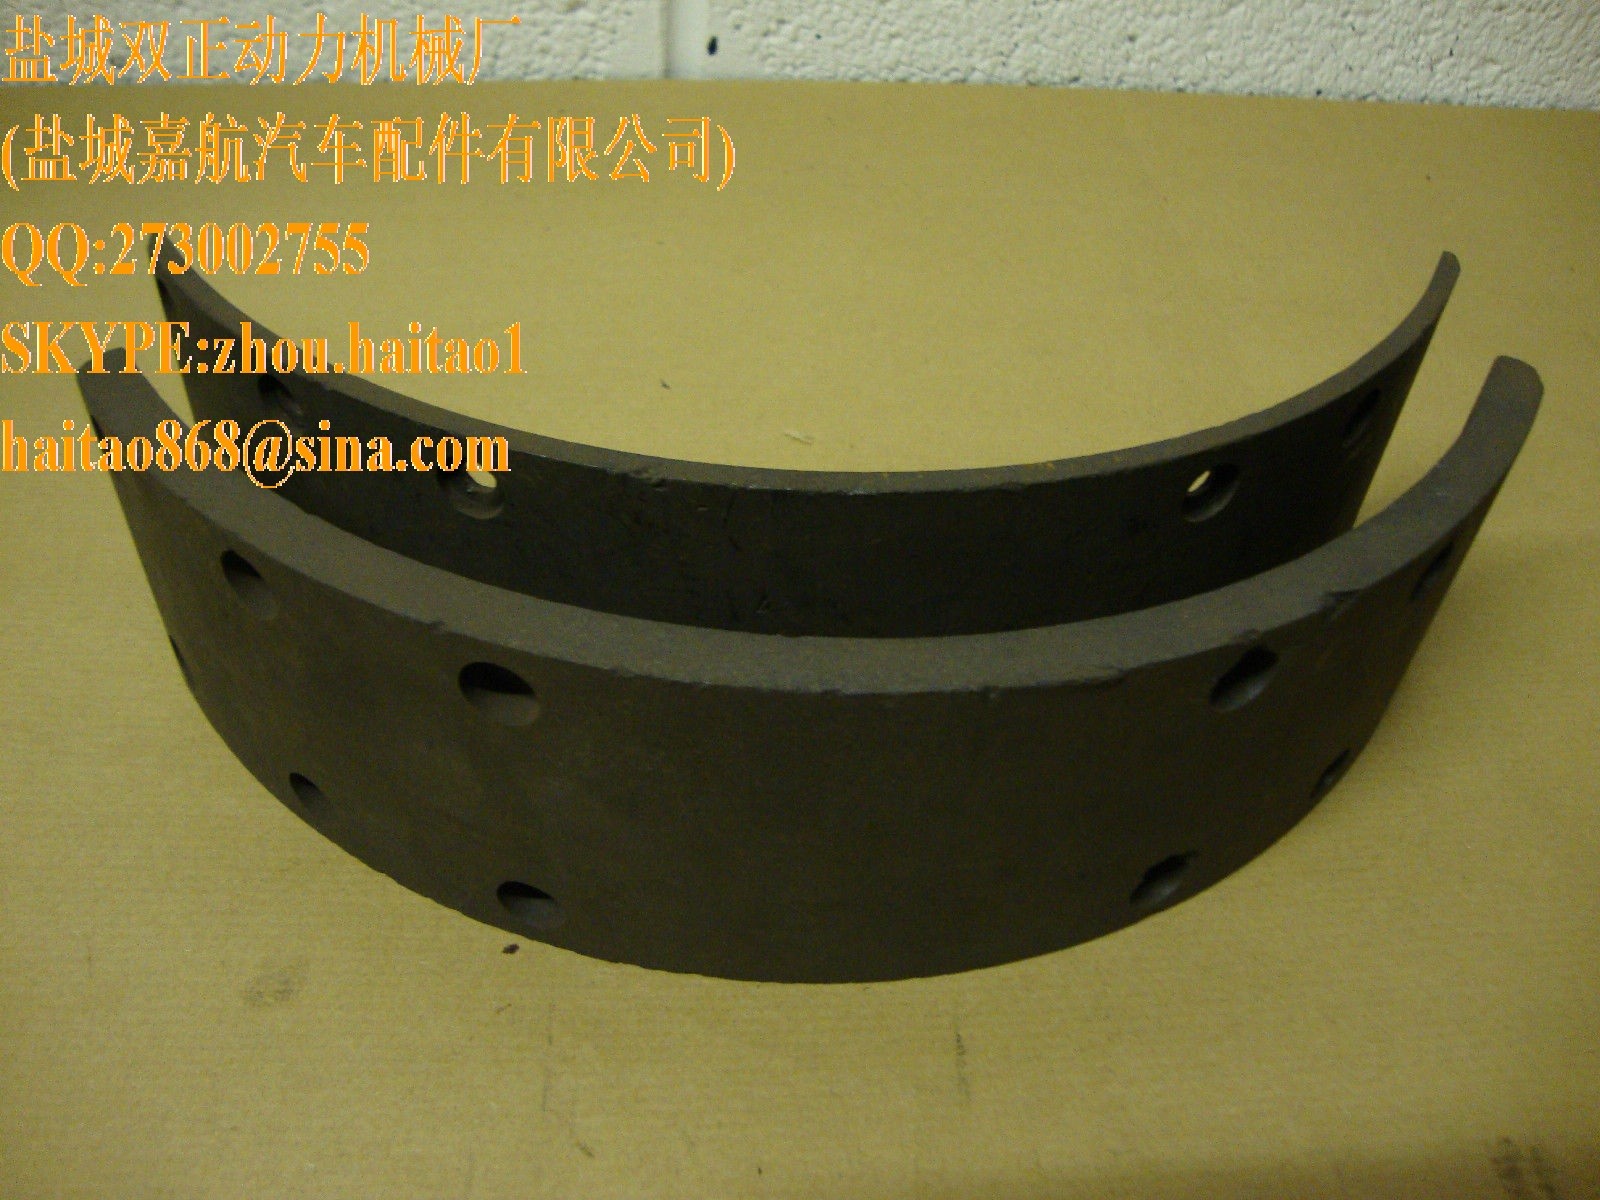 Wholesale Bedford TK KC - KD 1962 - 1987 BO/37/38/1 Front Brake Linings (One Wheel Set) from china suppliers